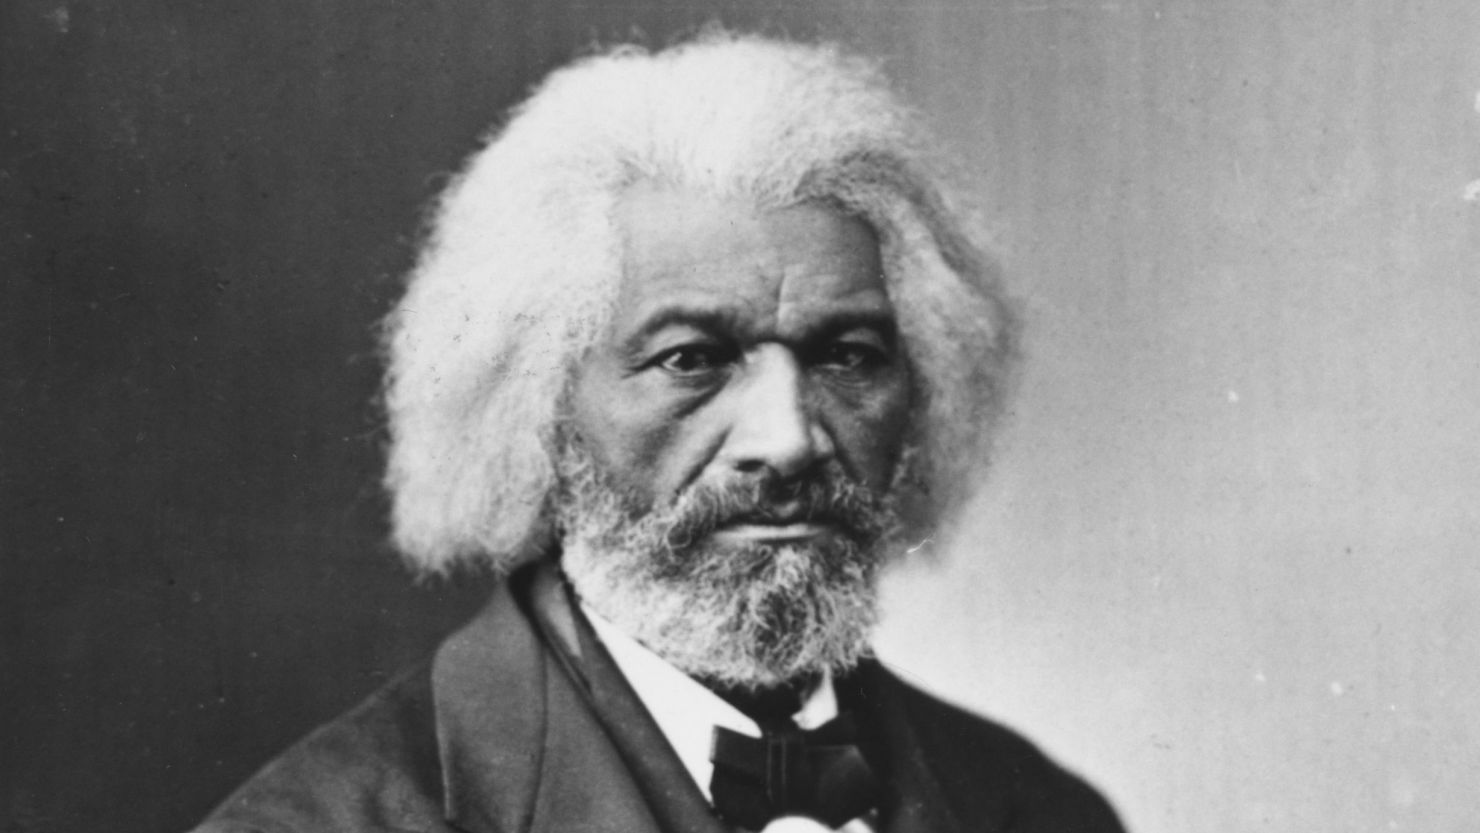 American journalist, author, abolitionist and former slave Frederick Douglass.